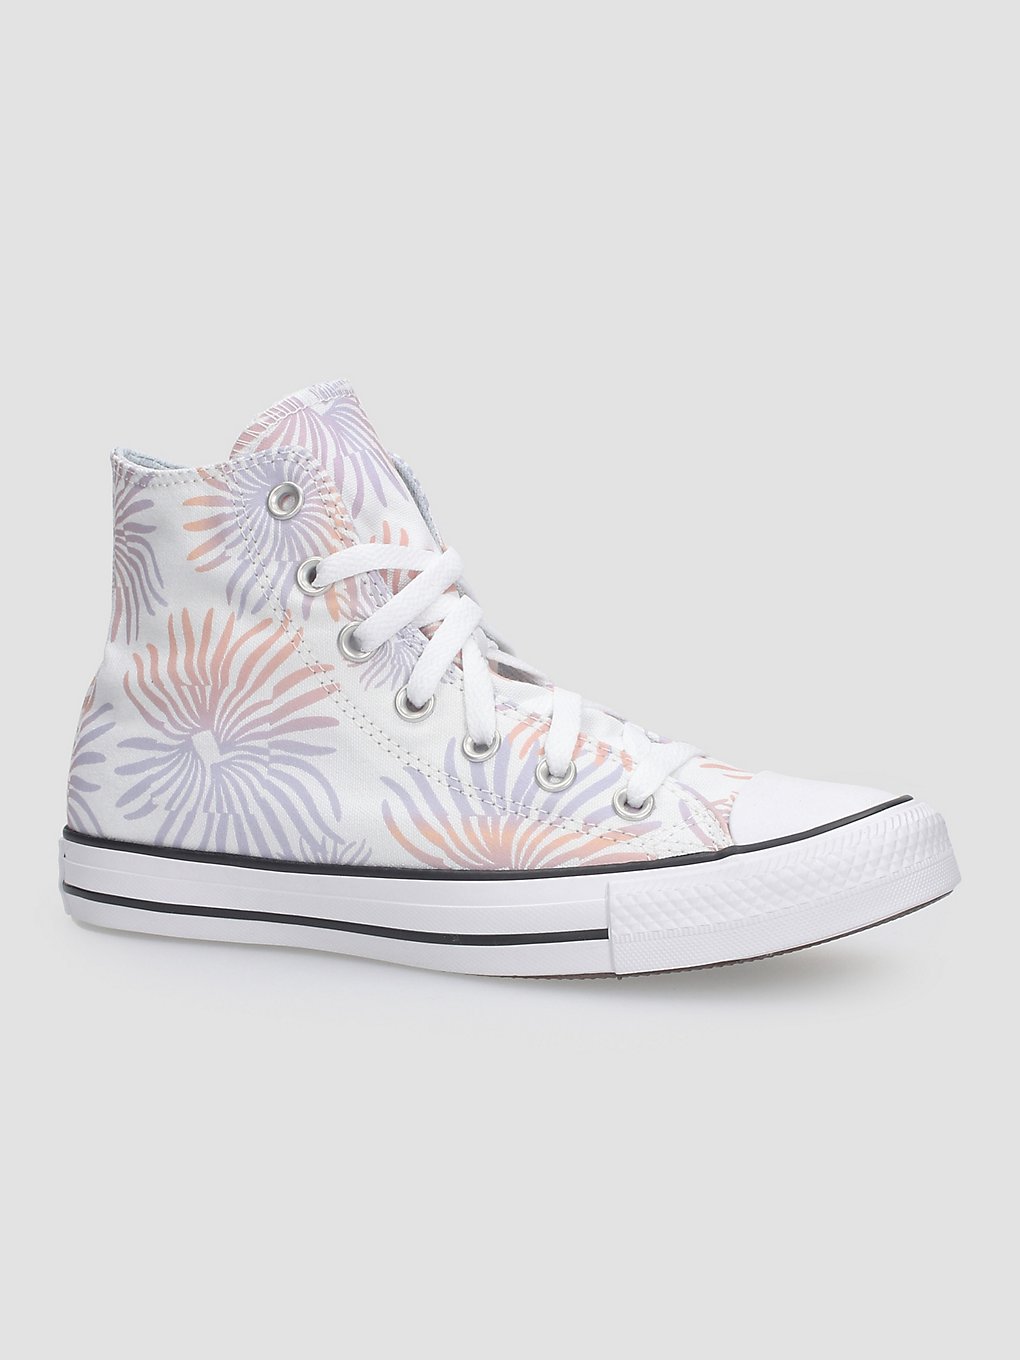 converse chuck taylor all star floral sneakers canyon dusk